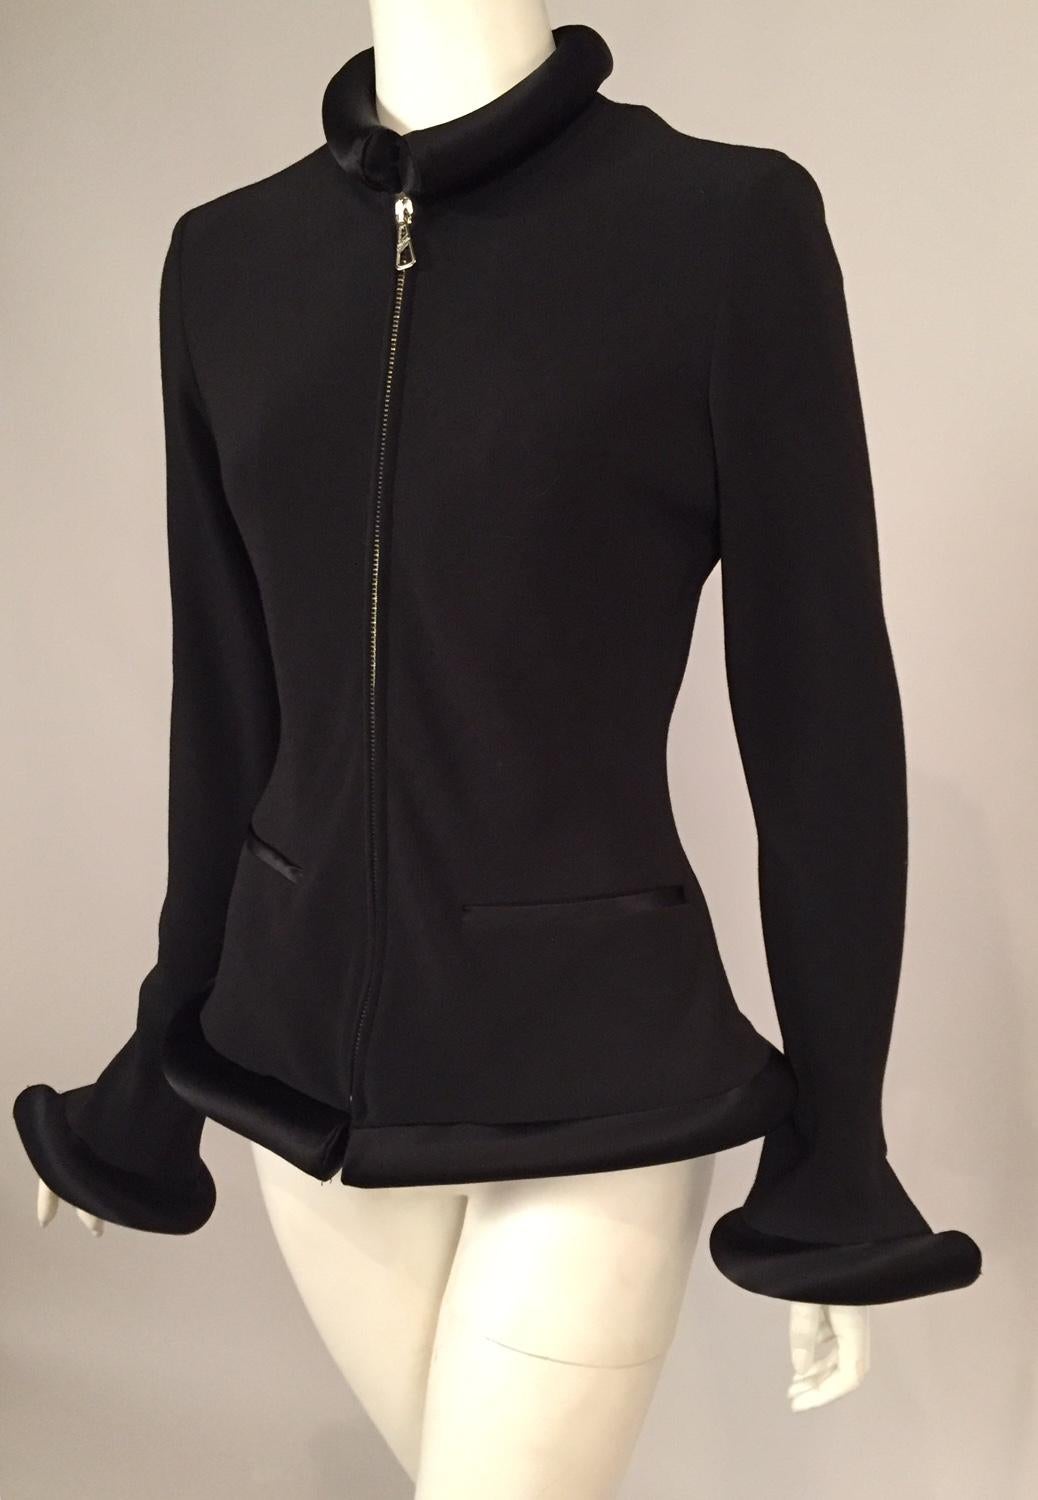 A spare but elegant black zip front jacket takes on a futuristic style with the addition of tubular padded black satin at the collar, cuffs and the hemline. The jacket fabric has some stretch insuring a flattering fit. It is marked a French size 40